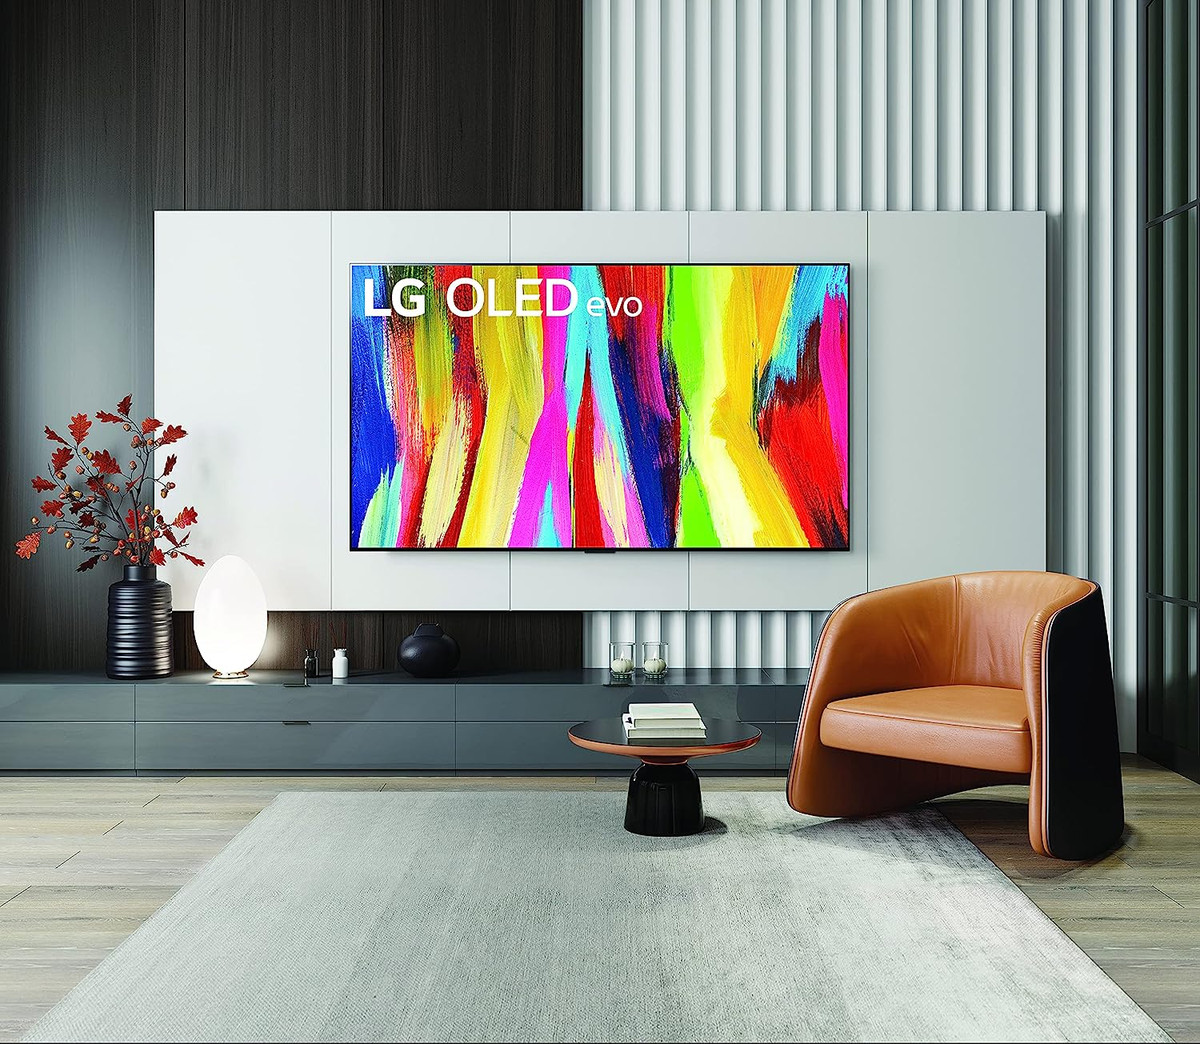 A stock photo of the LG C2 OLED TV